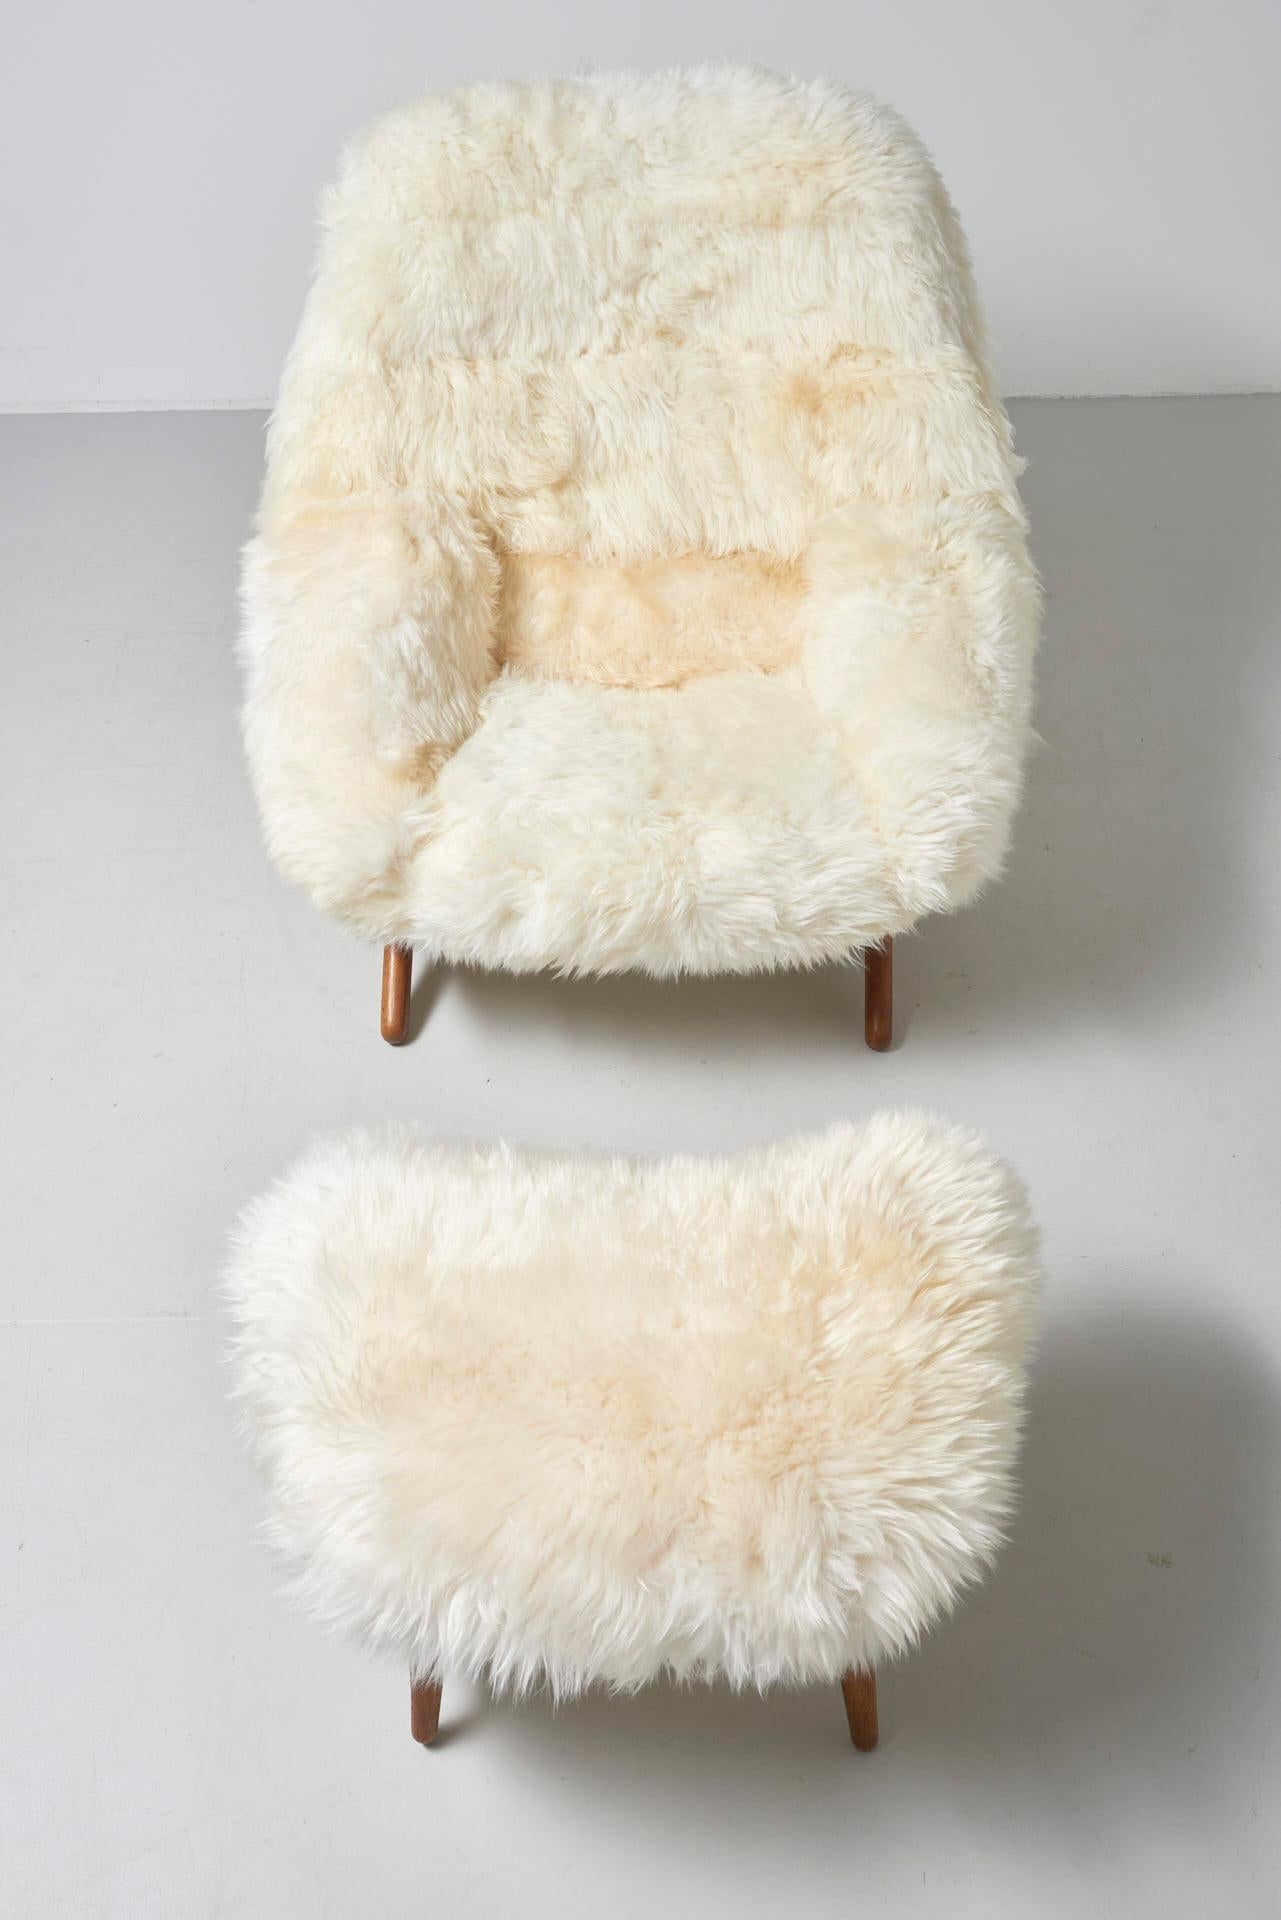 A lounge chair with ottoman designed by Illum Wikkelsø in 1959, model ML 91. Oak legs and reupholstered in lamb skin. Made by Mikael Laursen in Denmark.